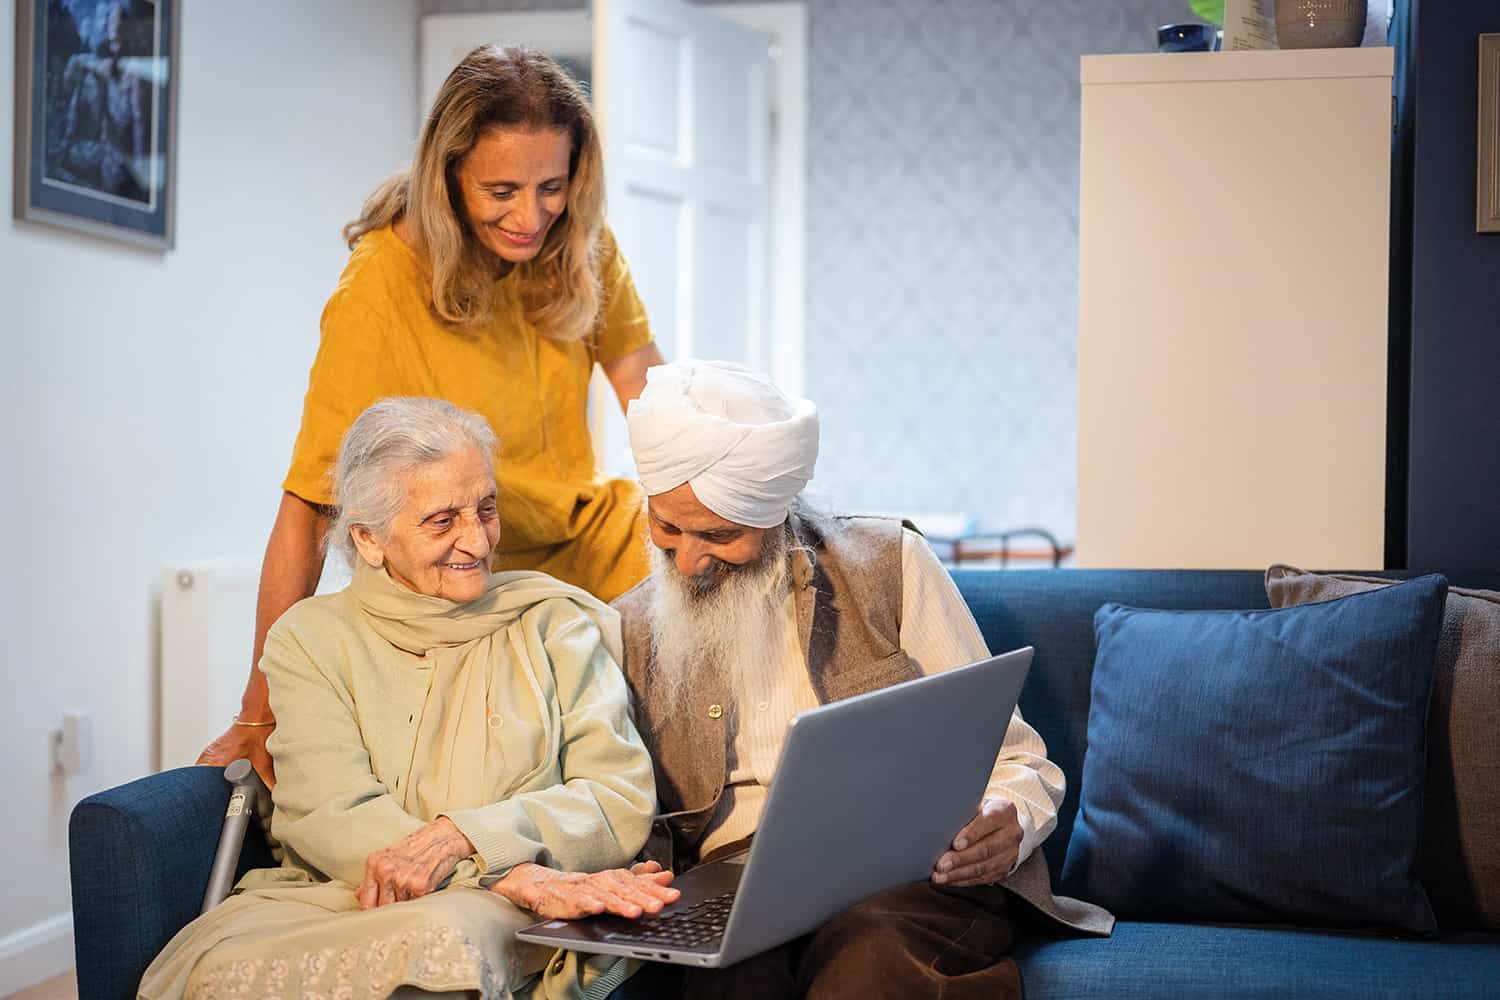 photo of older Sikh man and woman on sofa using laptop to connect socially